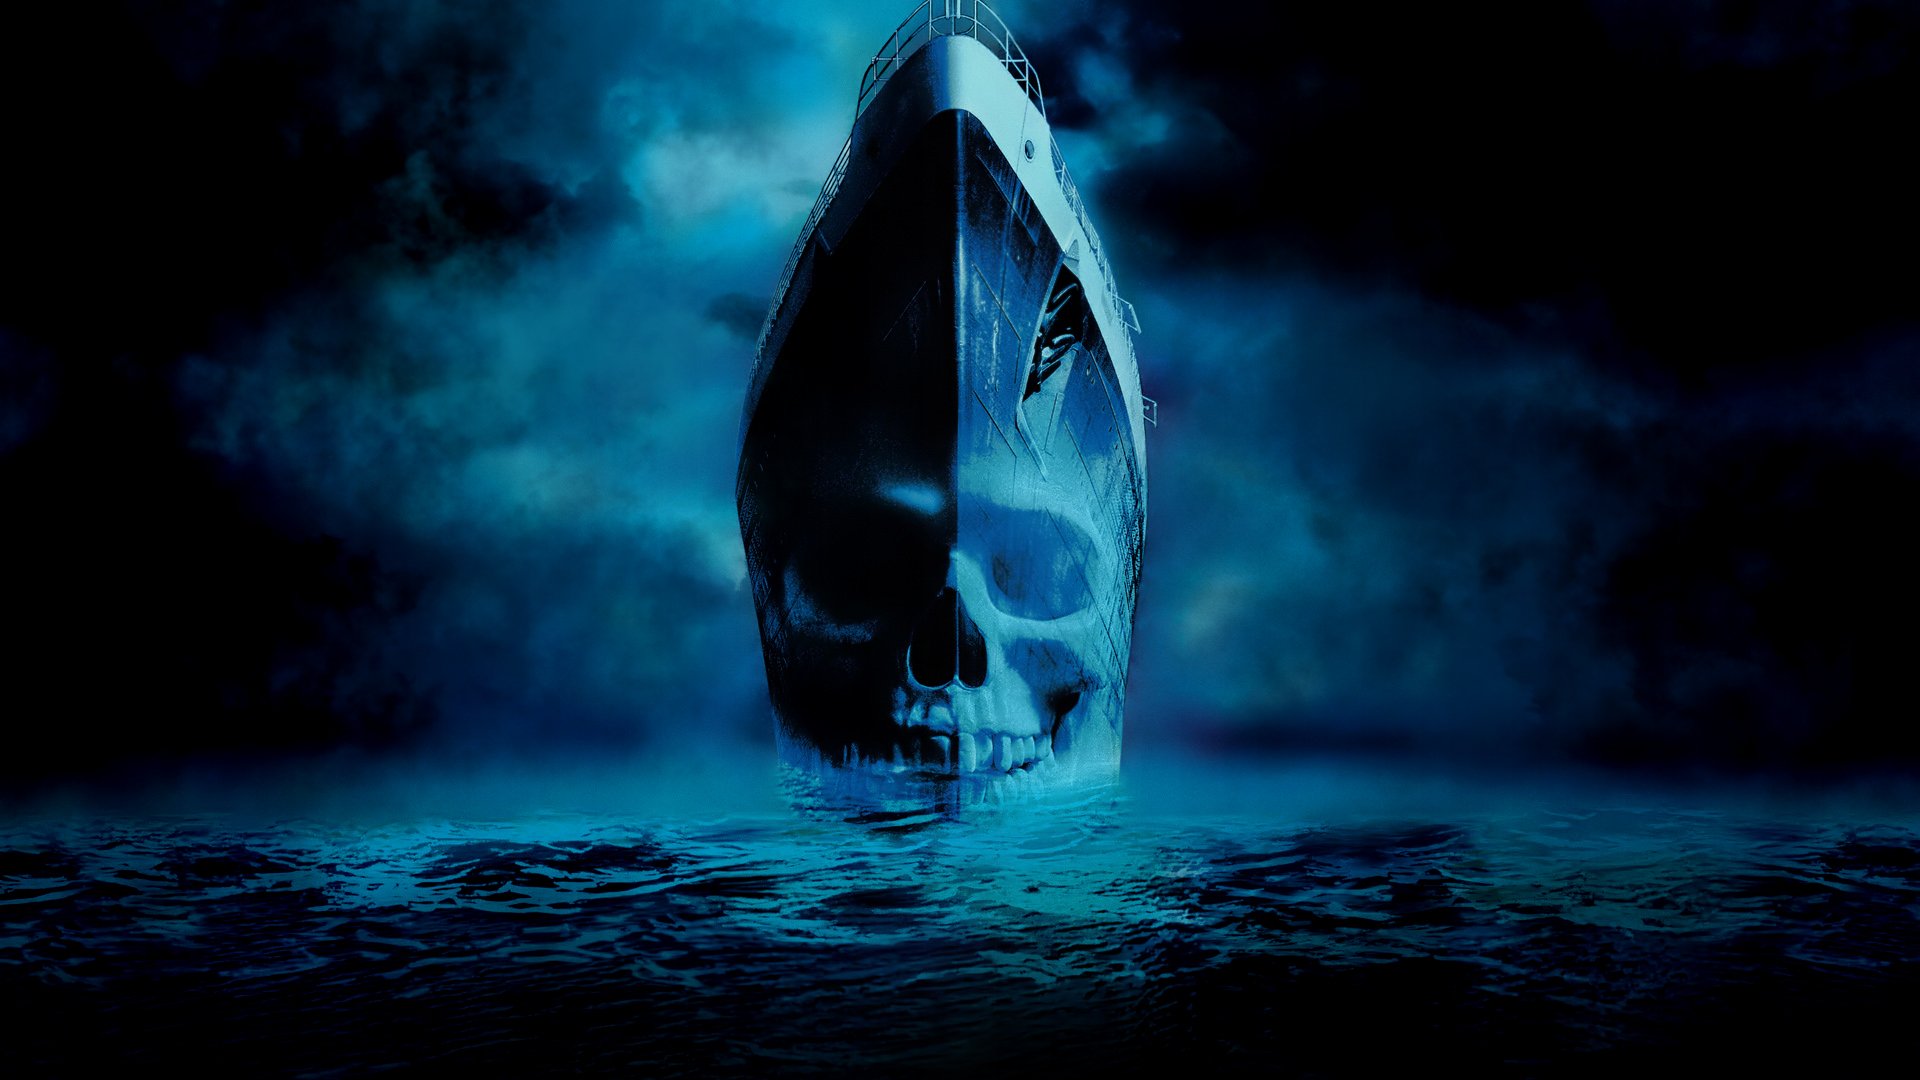 ghost ship movie images